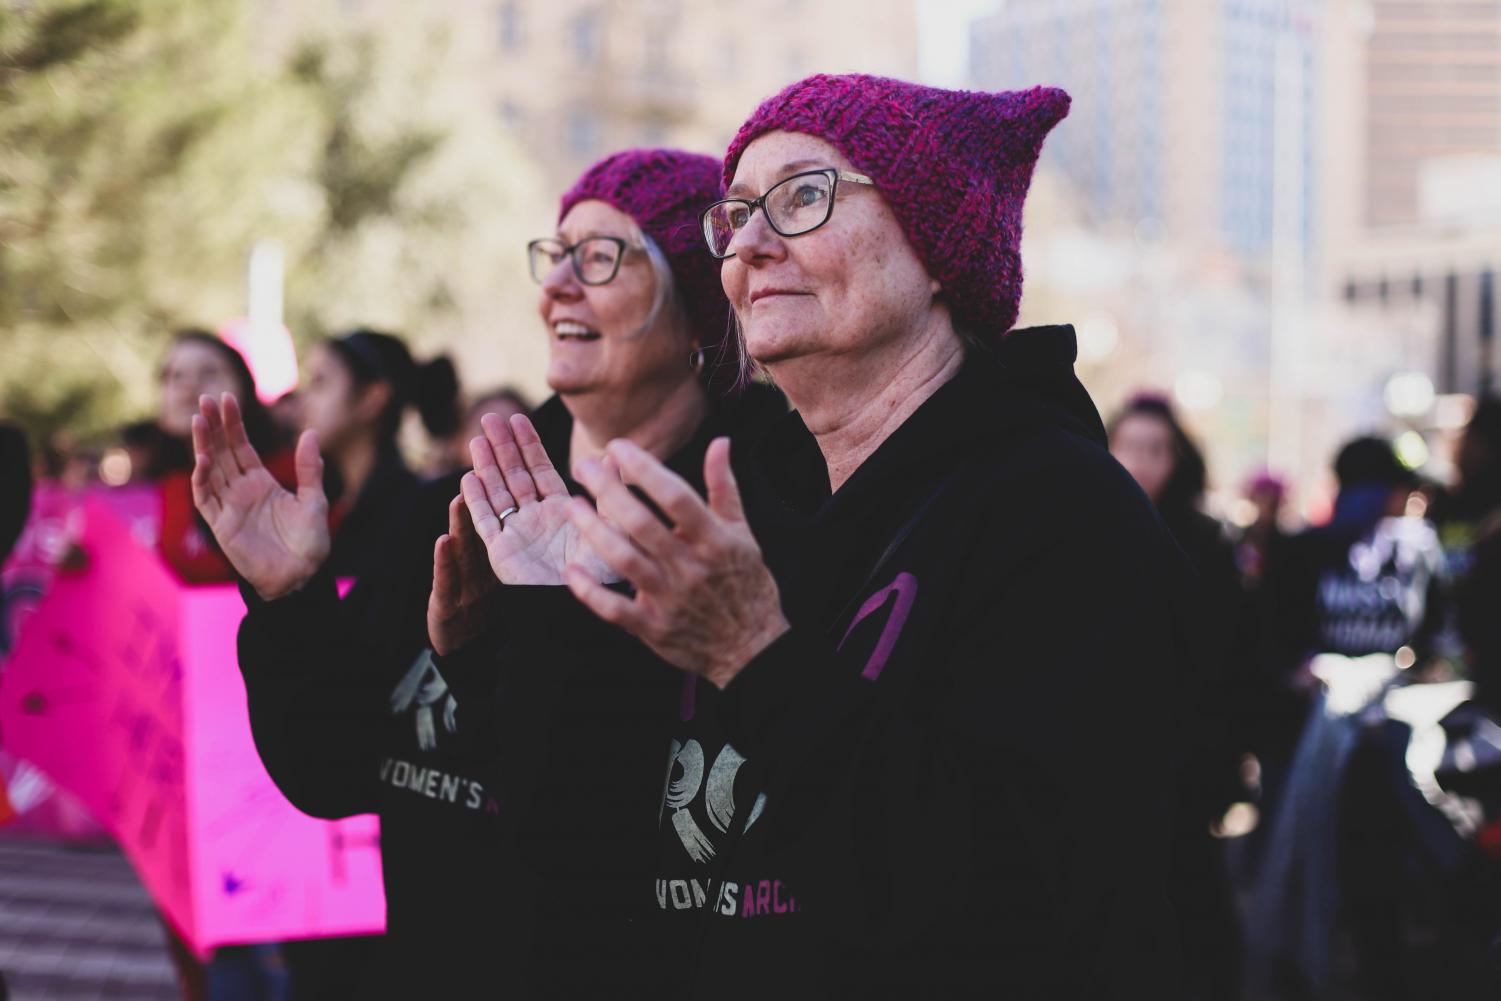 Hundreds+gather+for+third+annual+Women%E2%80%99s+March+in+Downtown+El+Paso